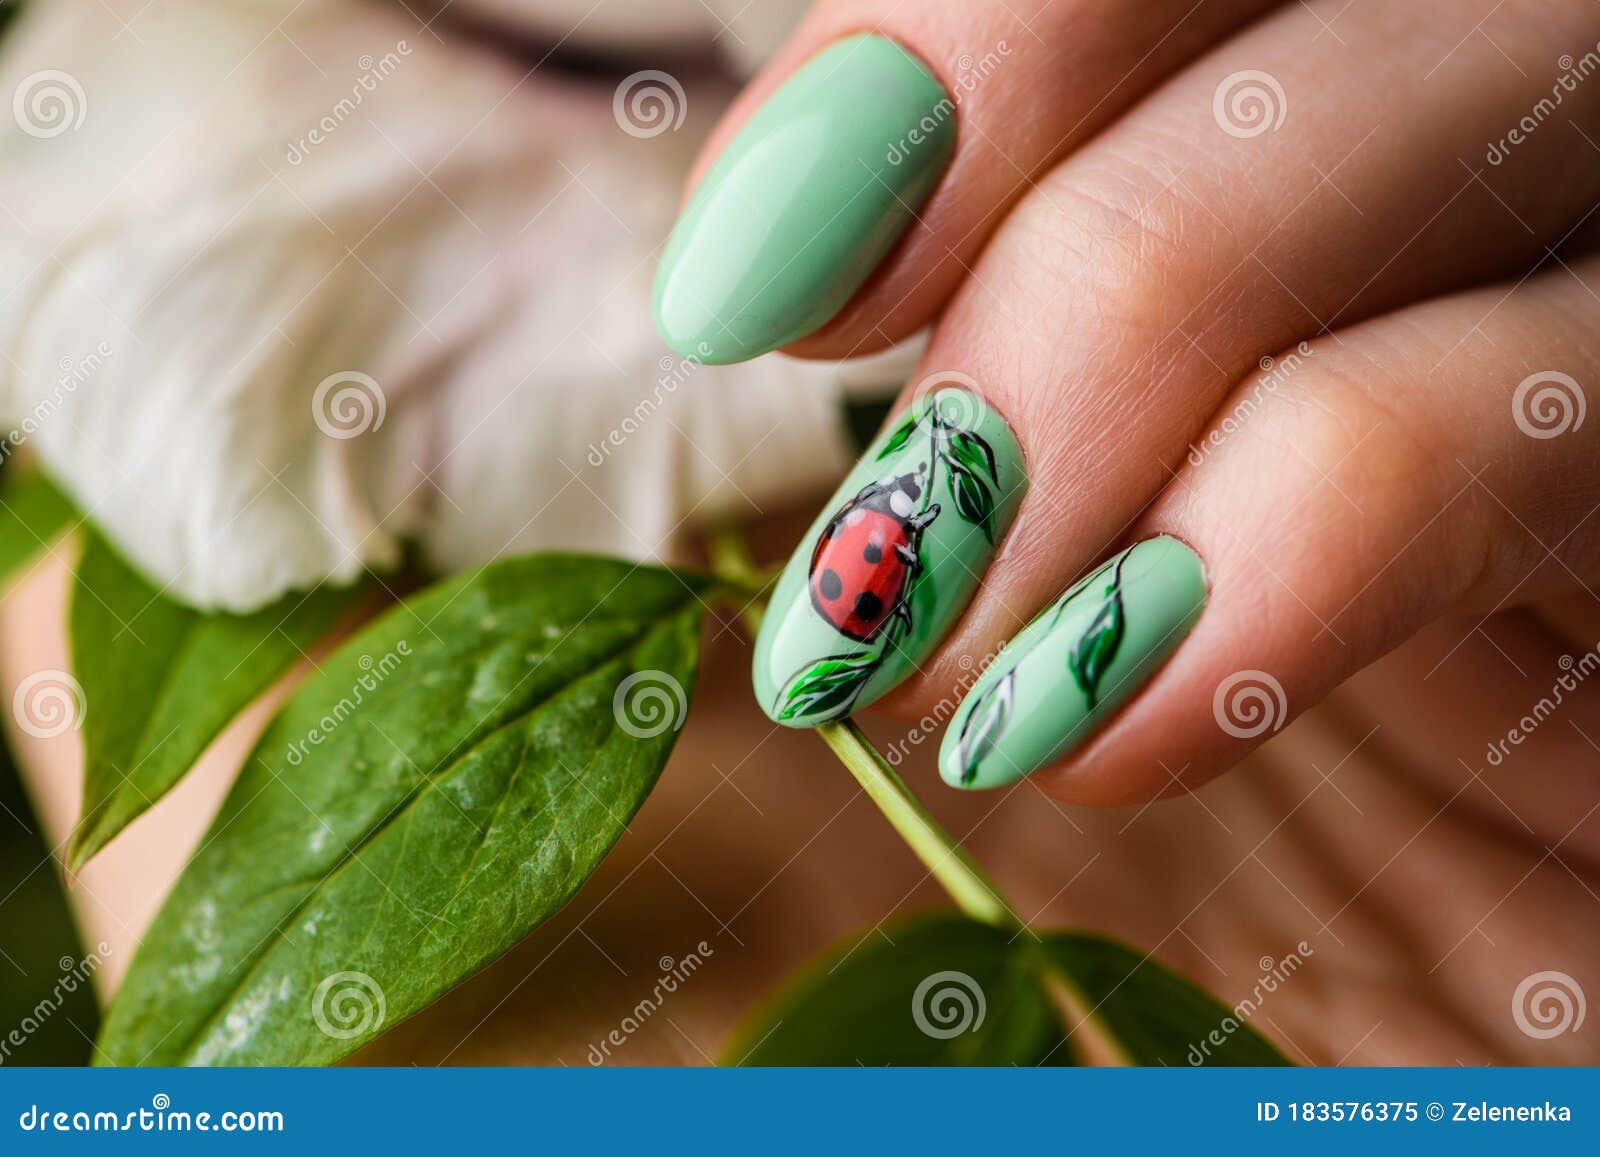 Nails Design. Hands with Bright Green Manicure with Flowers. Close Up ...